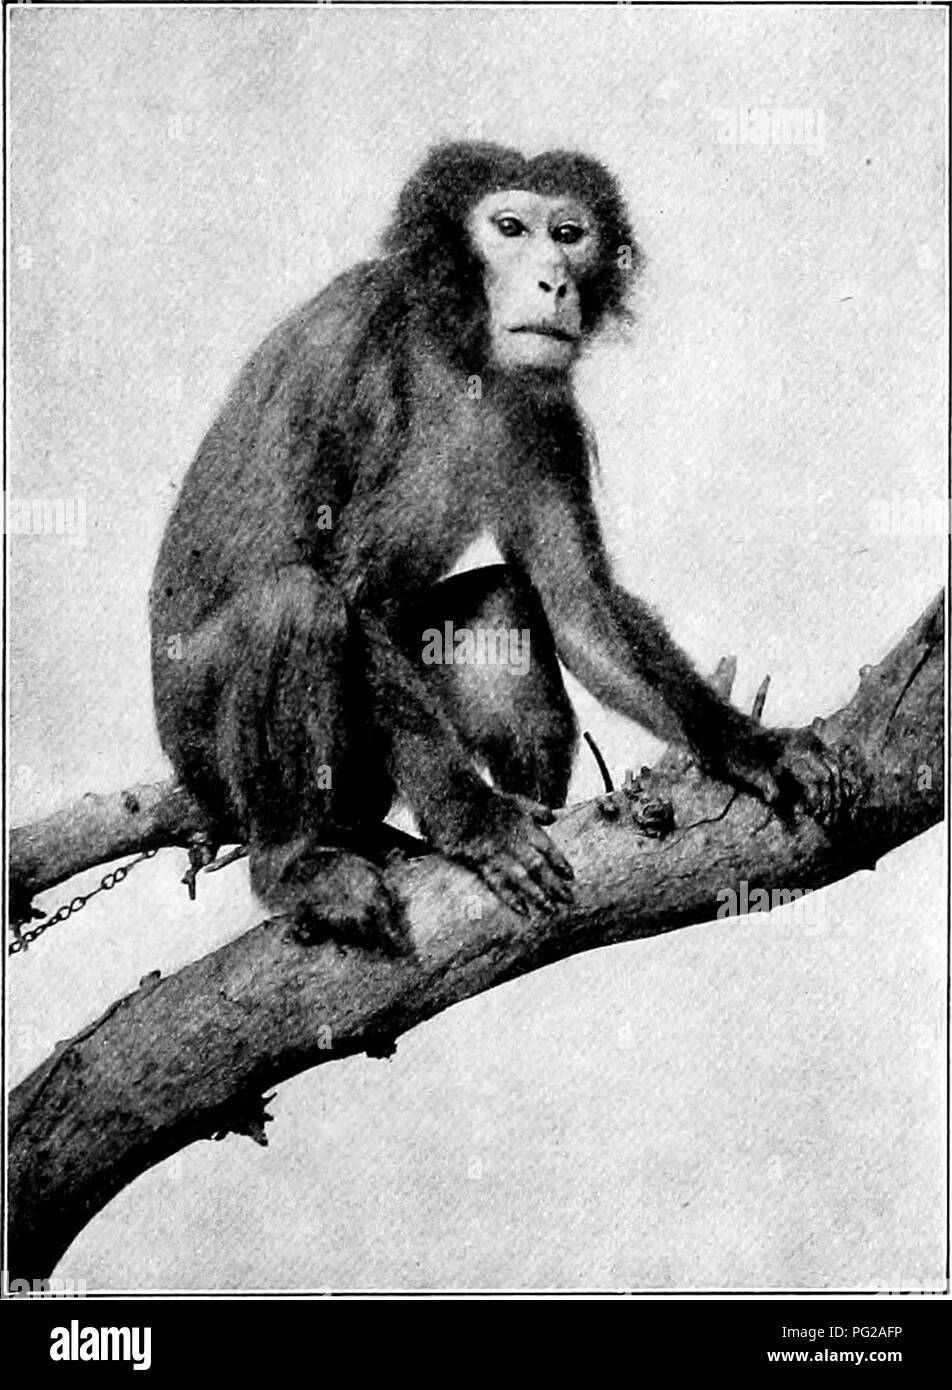 . The American natural history; a foundation of useful knowledge of the higher animals of North America. Natural history. OLD WORLD MONKEYS 13 The Slamang,* of Sumatra, is the largest and rarest of the Gibbons. It is jet black, all over, face as well as fur, and it has a throat pouch which is distended to astounding proportions when it utters its peculiar, piercing cry. This species is as rare in captivity as the gorilla, and the only specimen seen alive in the New World up to 1903 was exhibited at the New York Zoo- logical Park in that year. OLD-WORLD MONKEYS AND BABOONS. Cercopithecidae. Typ Stock Photo